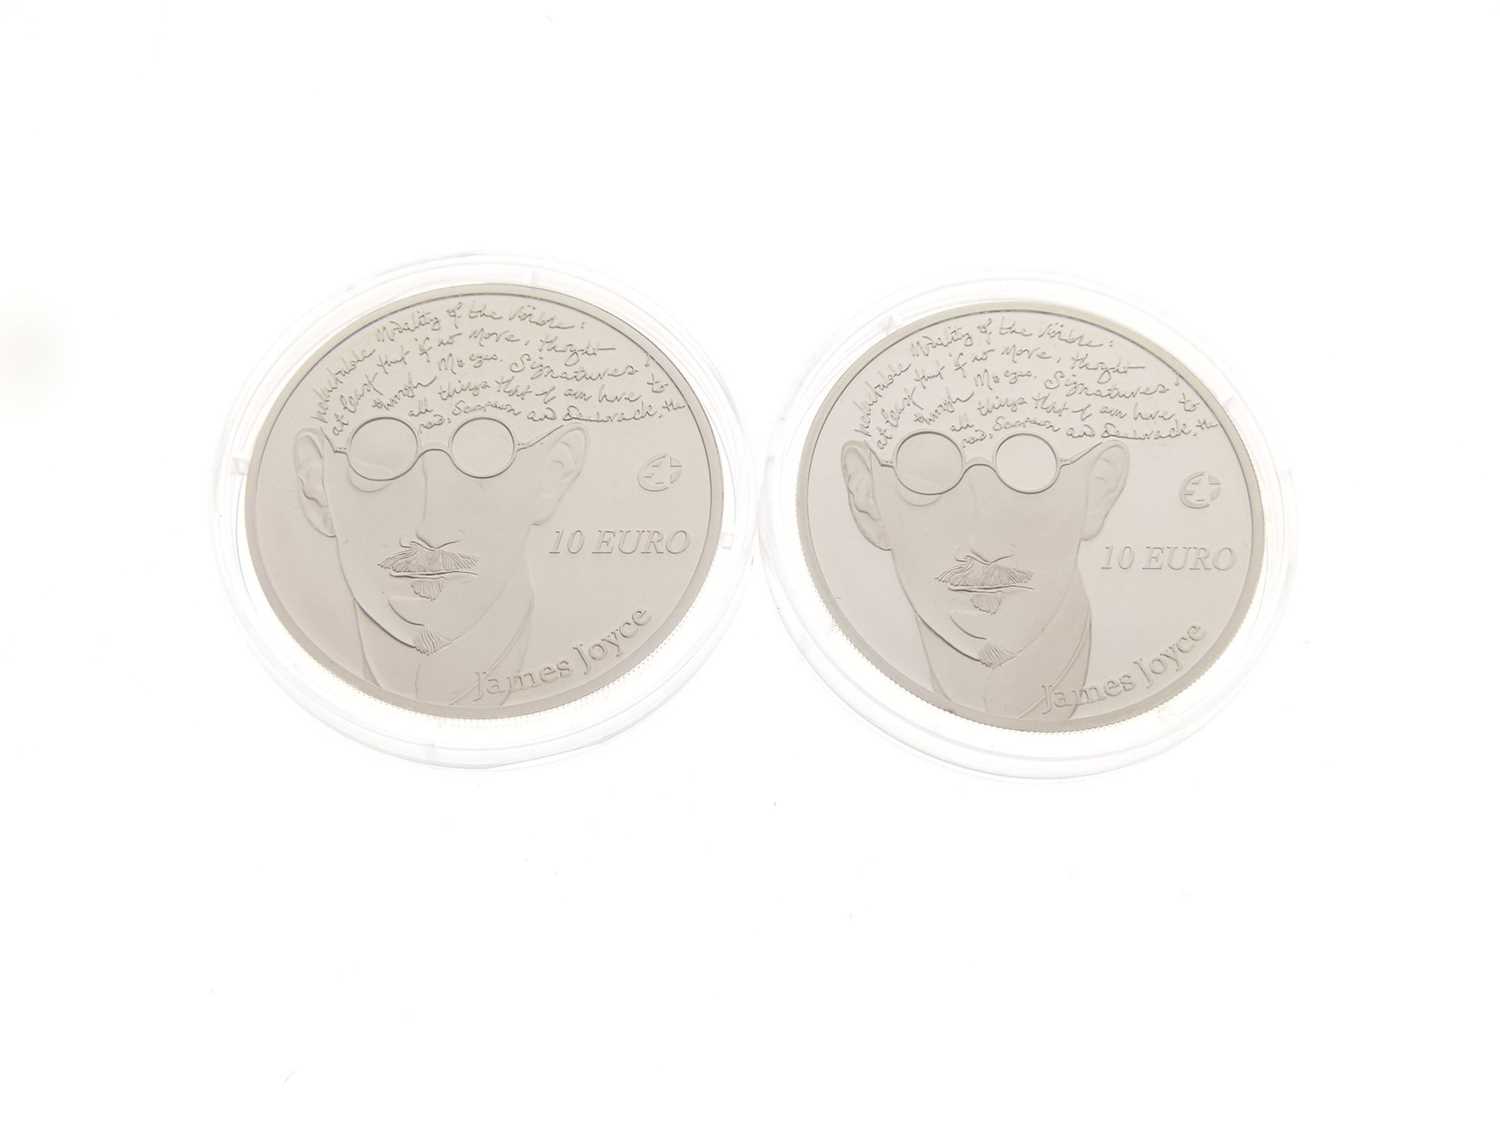 James Joyce 10 Euro silver proof coins - Image 6 of 6